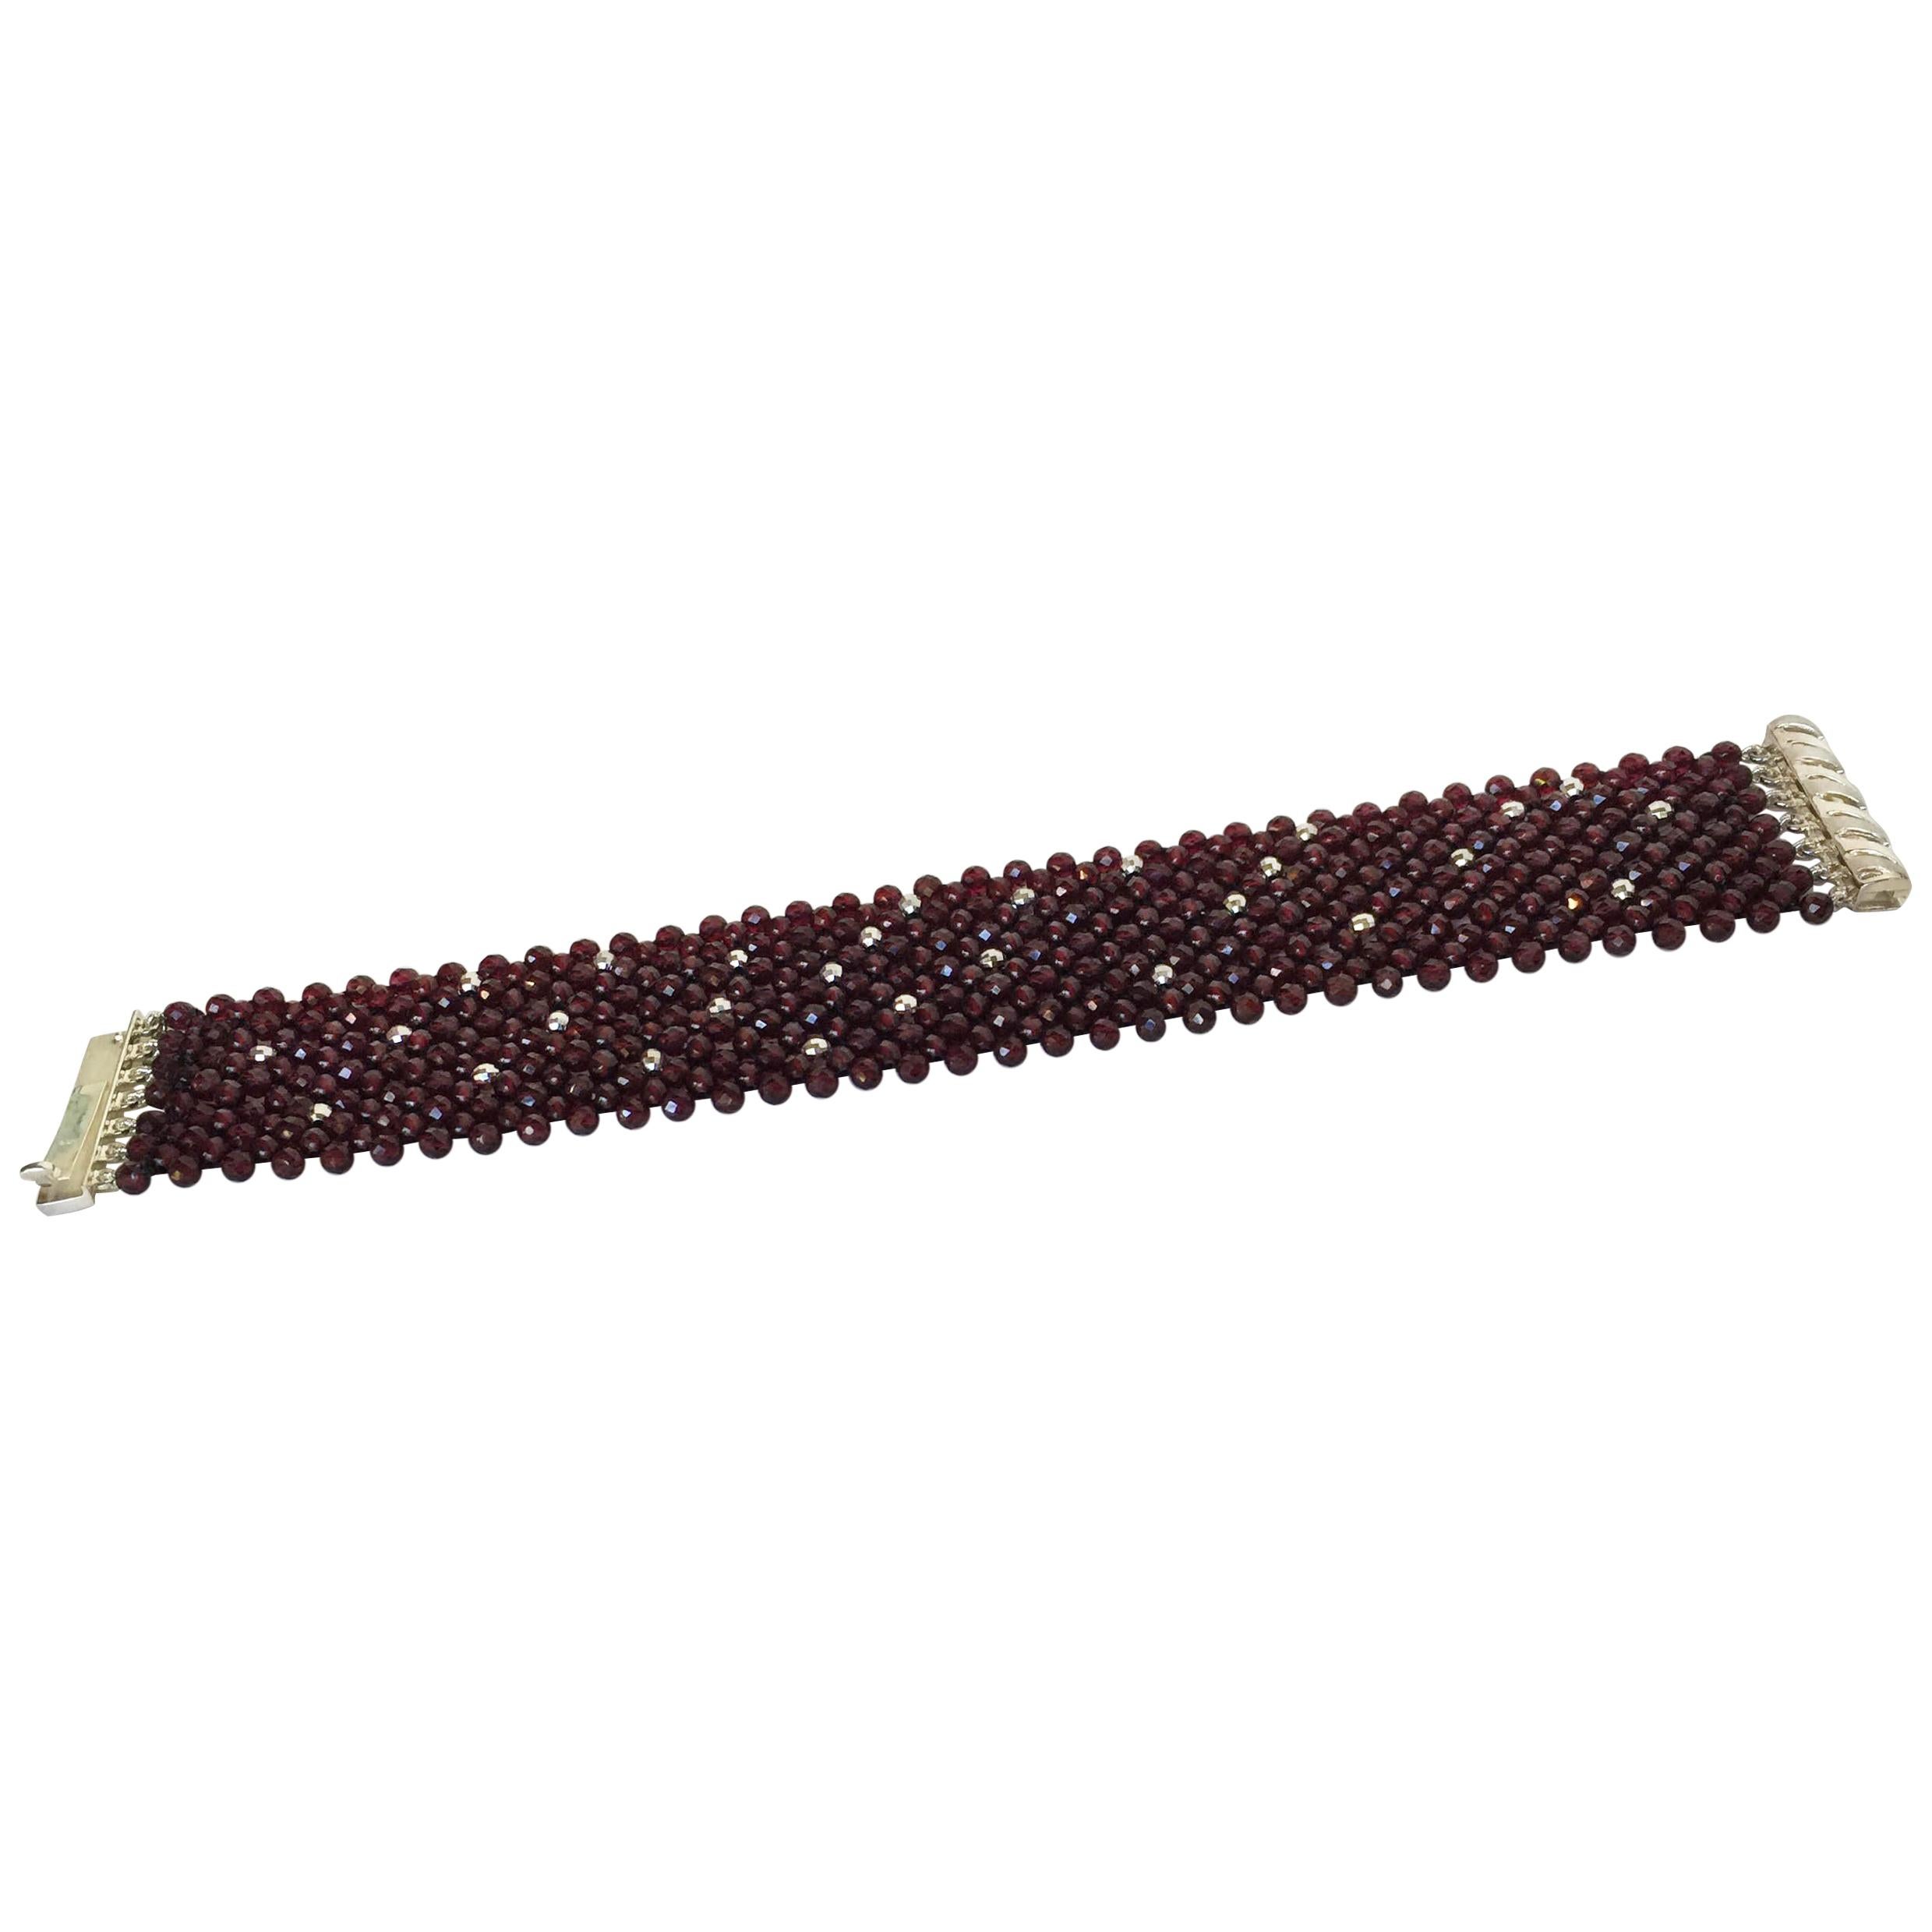 Marina J. Bracelet of Woven Faceted Garnet beads and Sterling Silver Clasp 